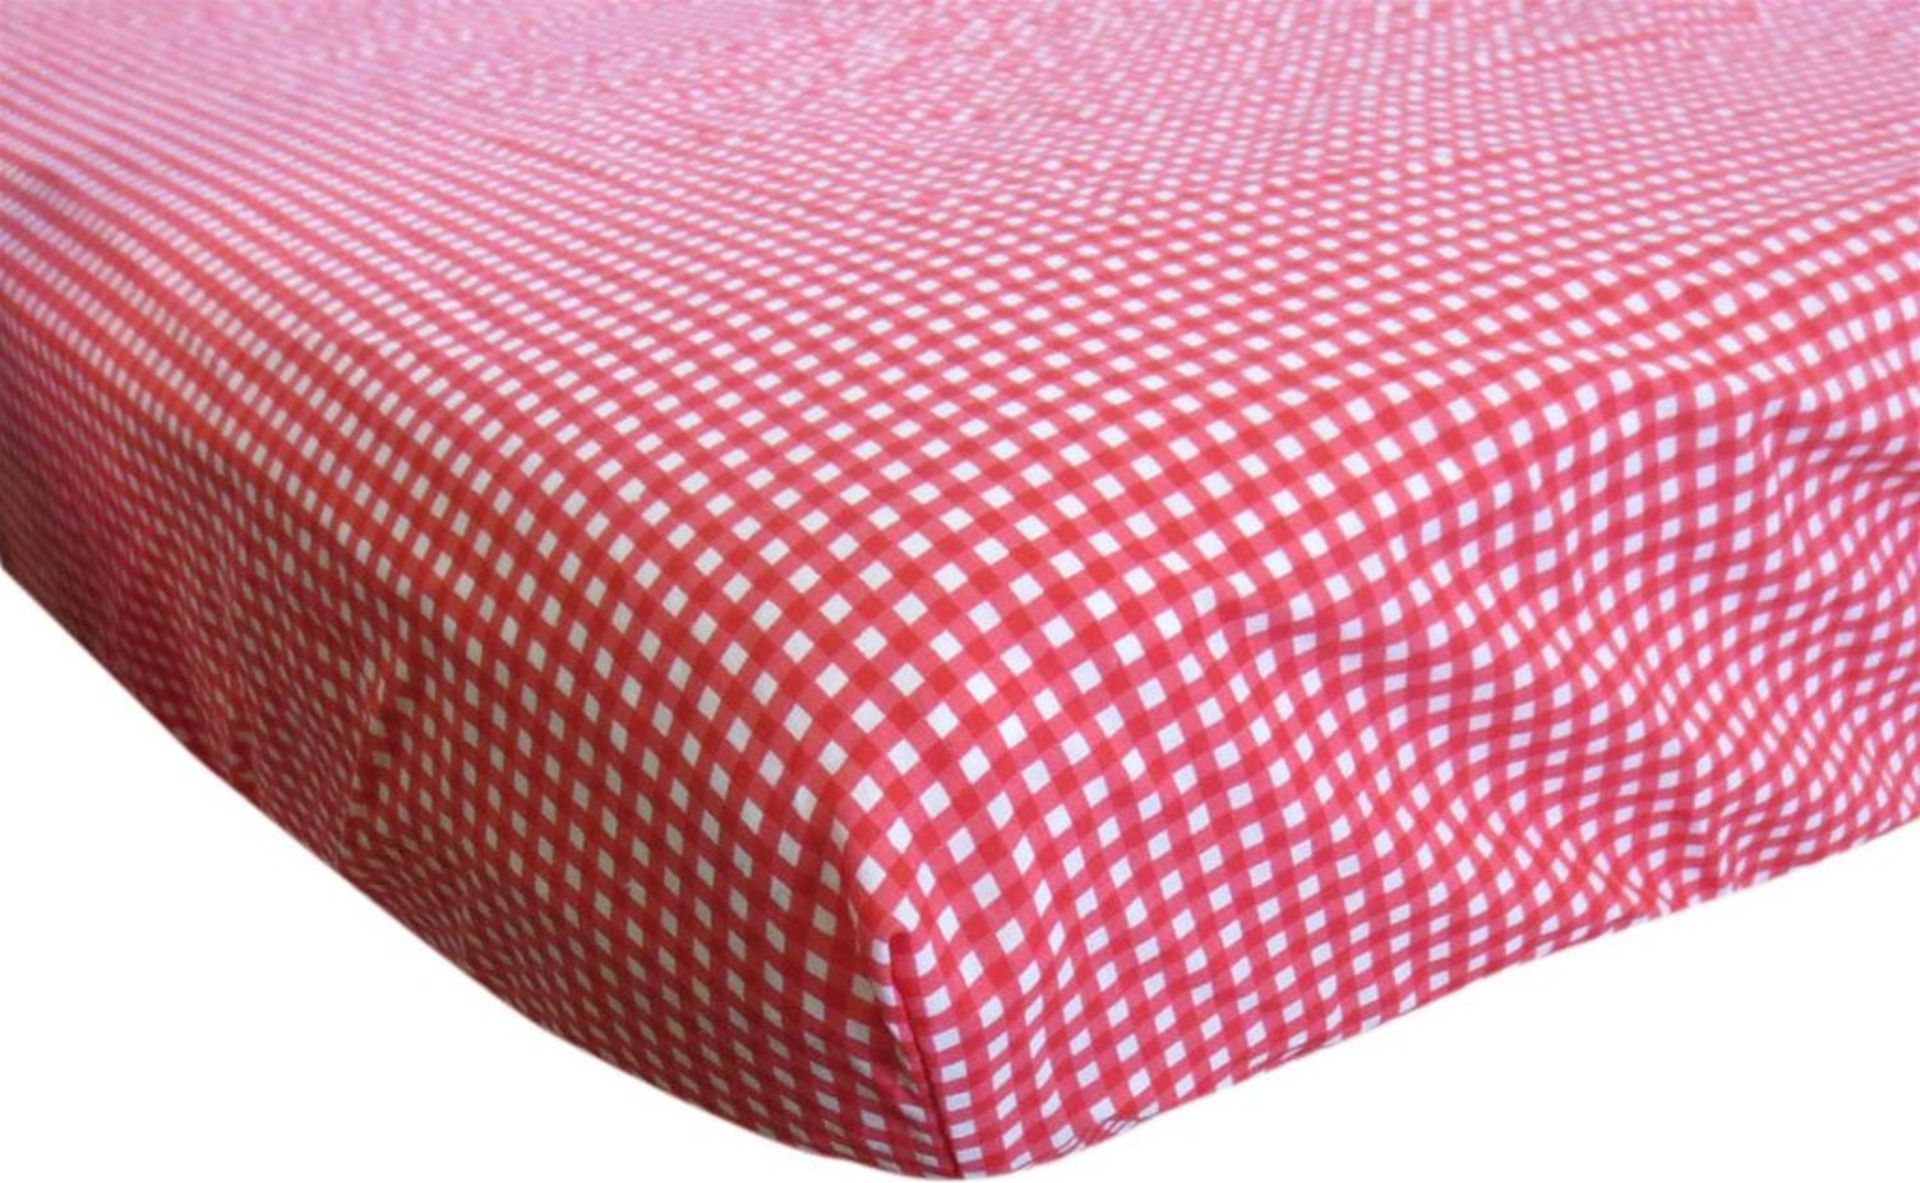 50 sets Fetch The Engine Boy's Cot Bed Fitted Sheet (140 x 70cm)